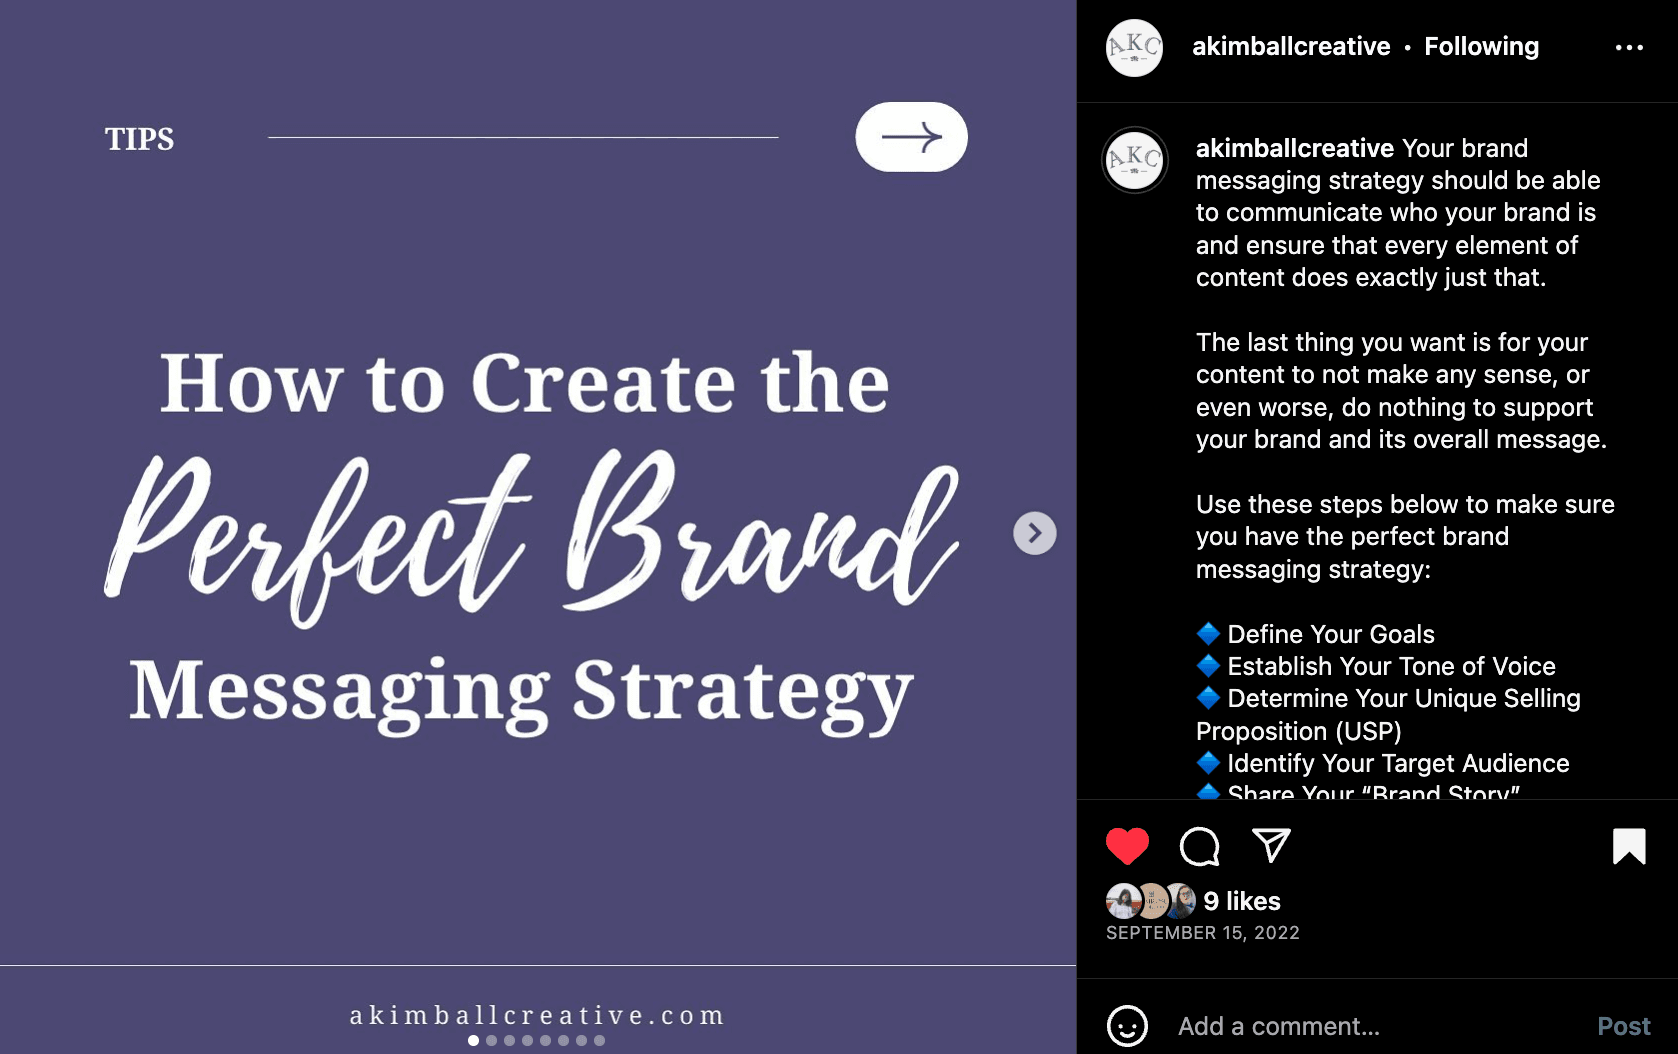 AKimball Creative Instagram post: HOW TO CREATE THE PERFECT BRAND MESSAGING STRATEGY